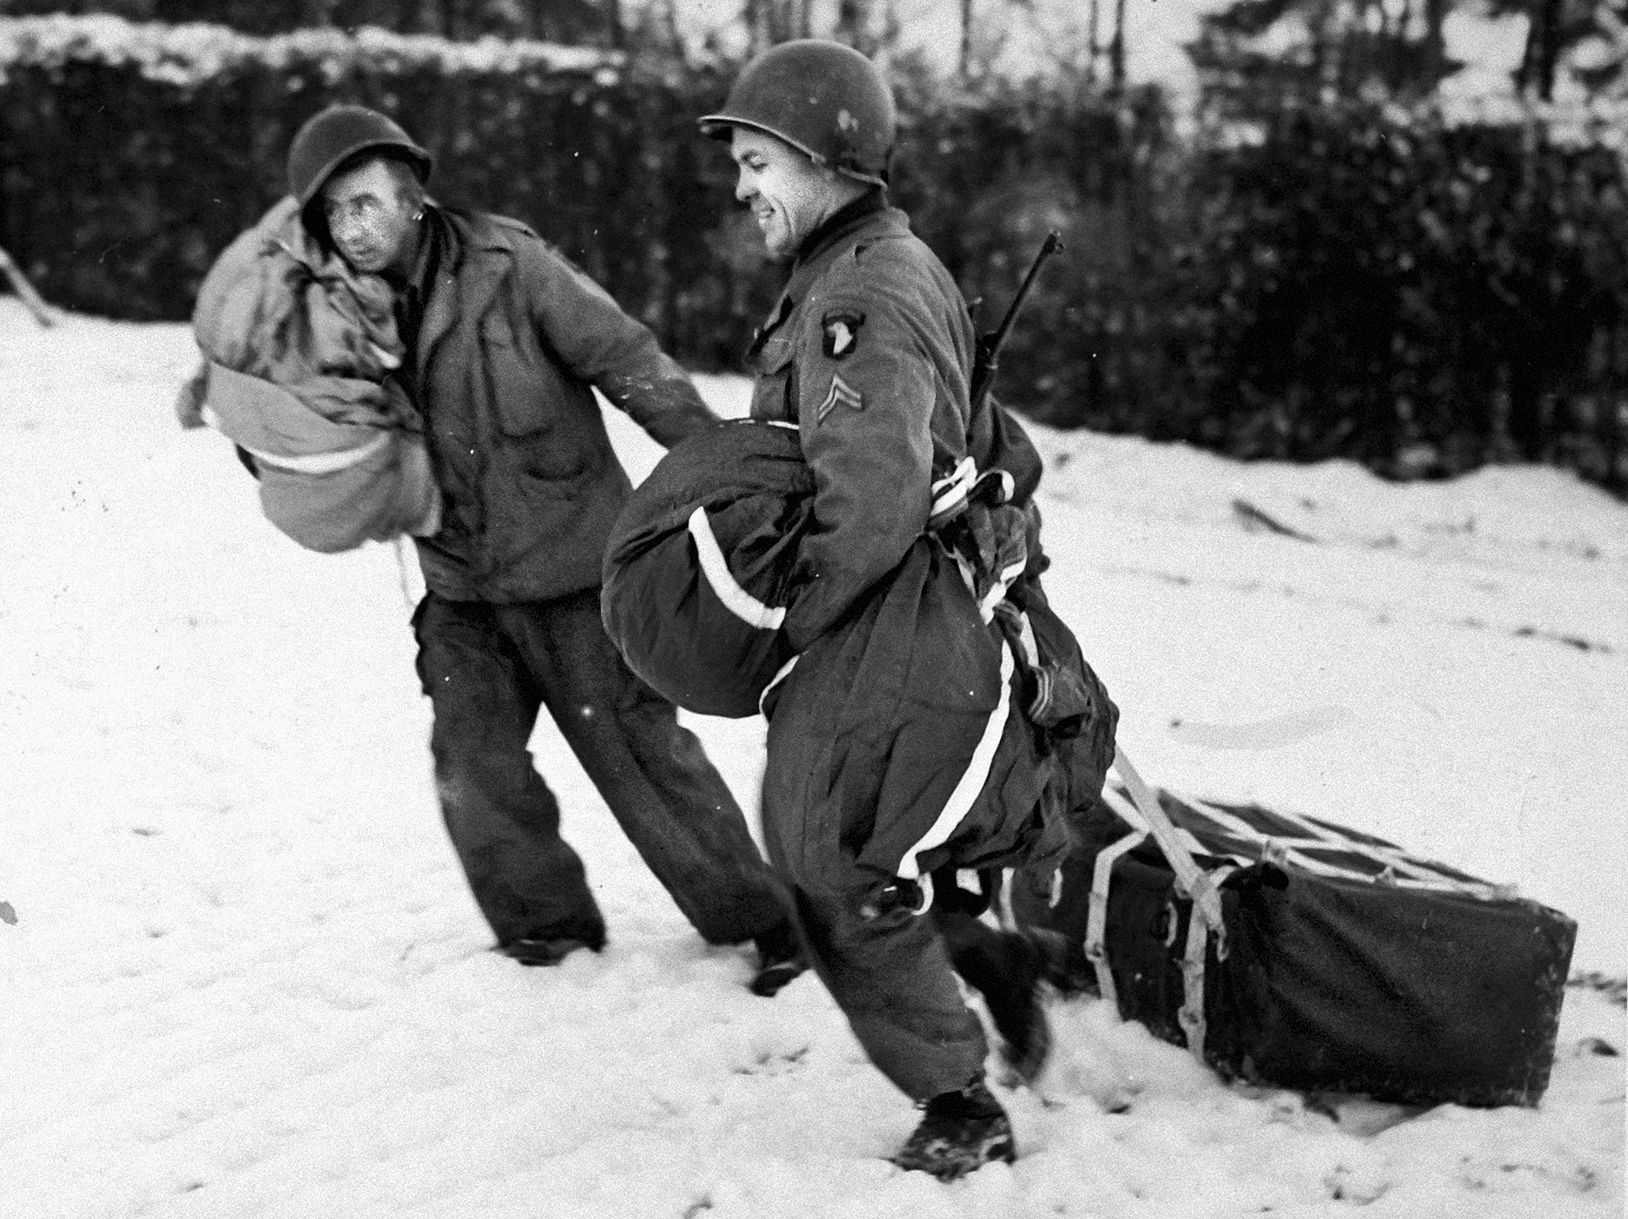 American troopers of the 101st Airborne Division drag supply containers air dropped to them during the siege of Bastogne. The 101st was surrounded at the Belgian crossroads town, and as the number of wounded increased, the losses sustained in the 326th Airborne Medical Company severely strained the ability of available medical personnel to care for those injured.